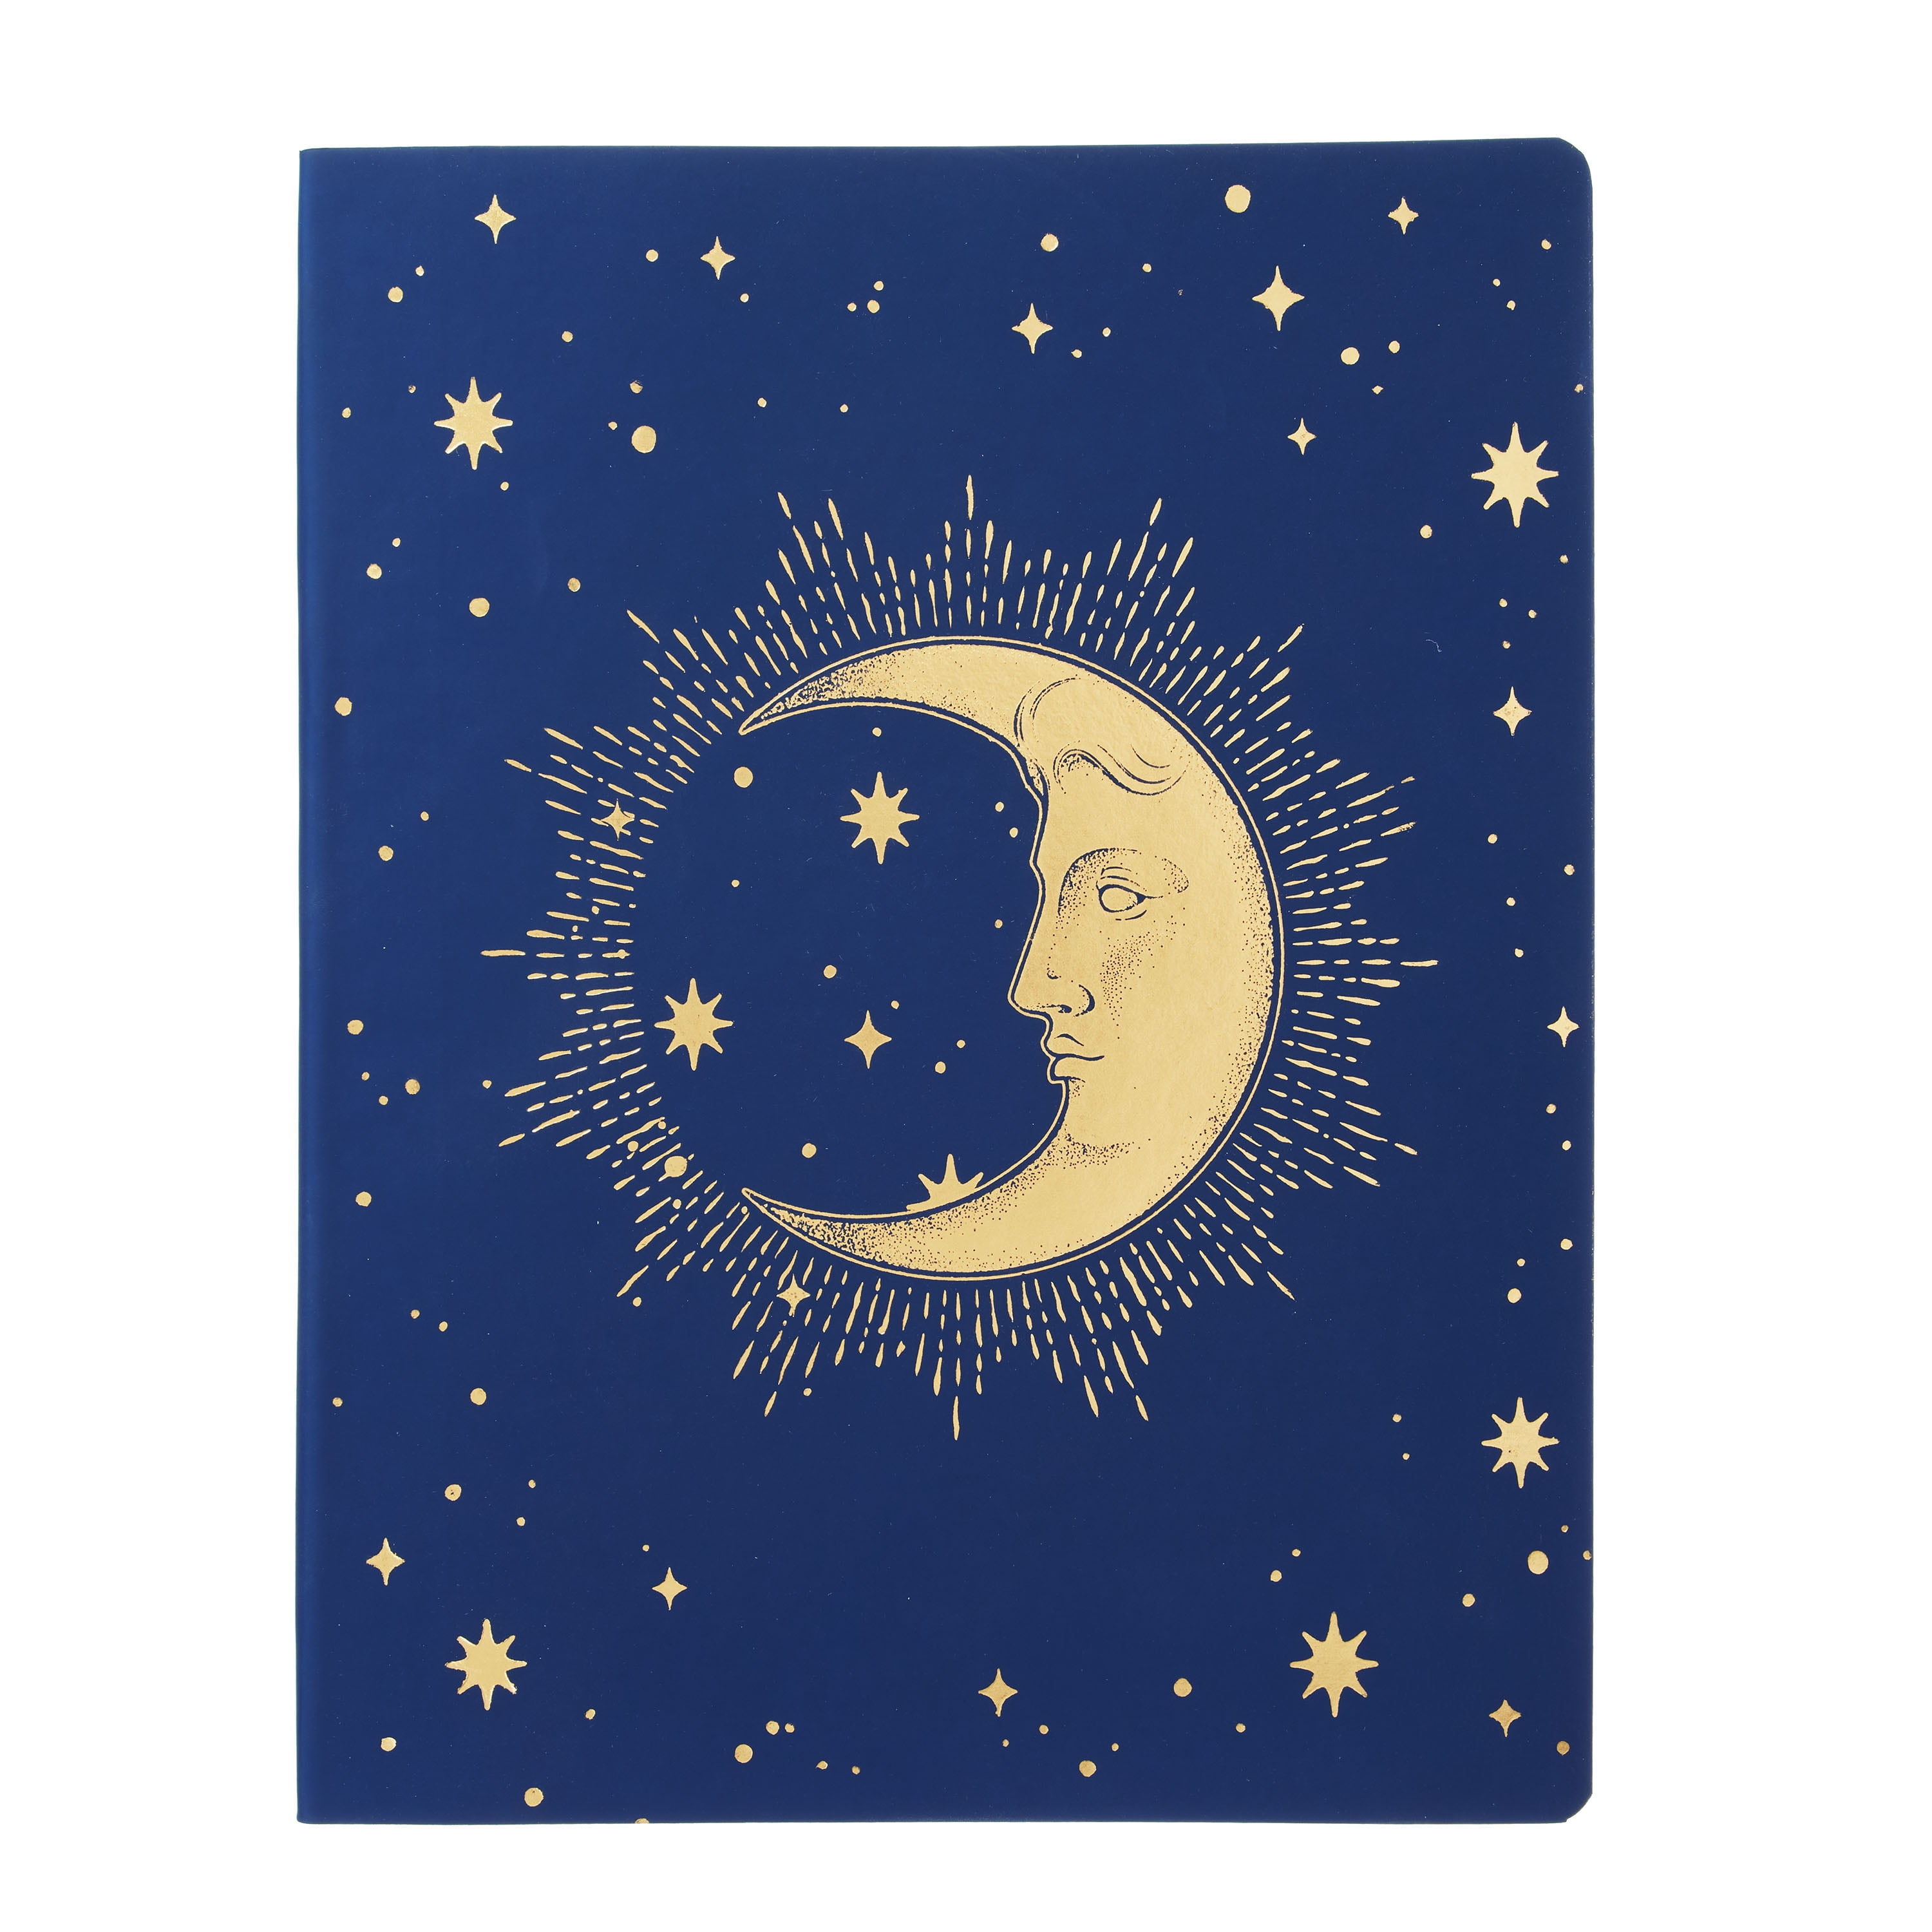 Pen + Gear Soft Cover Journal, 11x8.5 in, Gold Foil Edges, 96 Sheets, Blue, Soft Touch Polyurethane